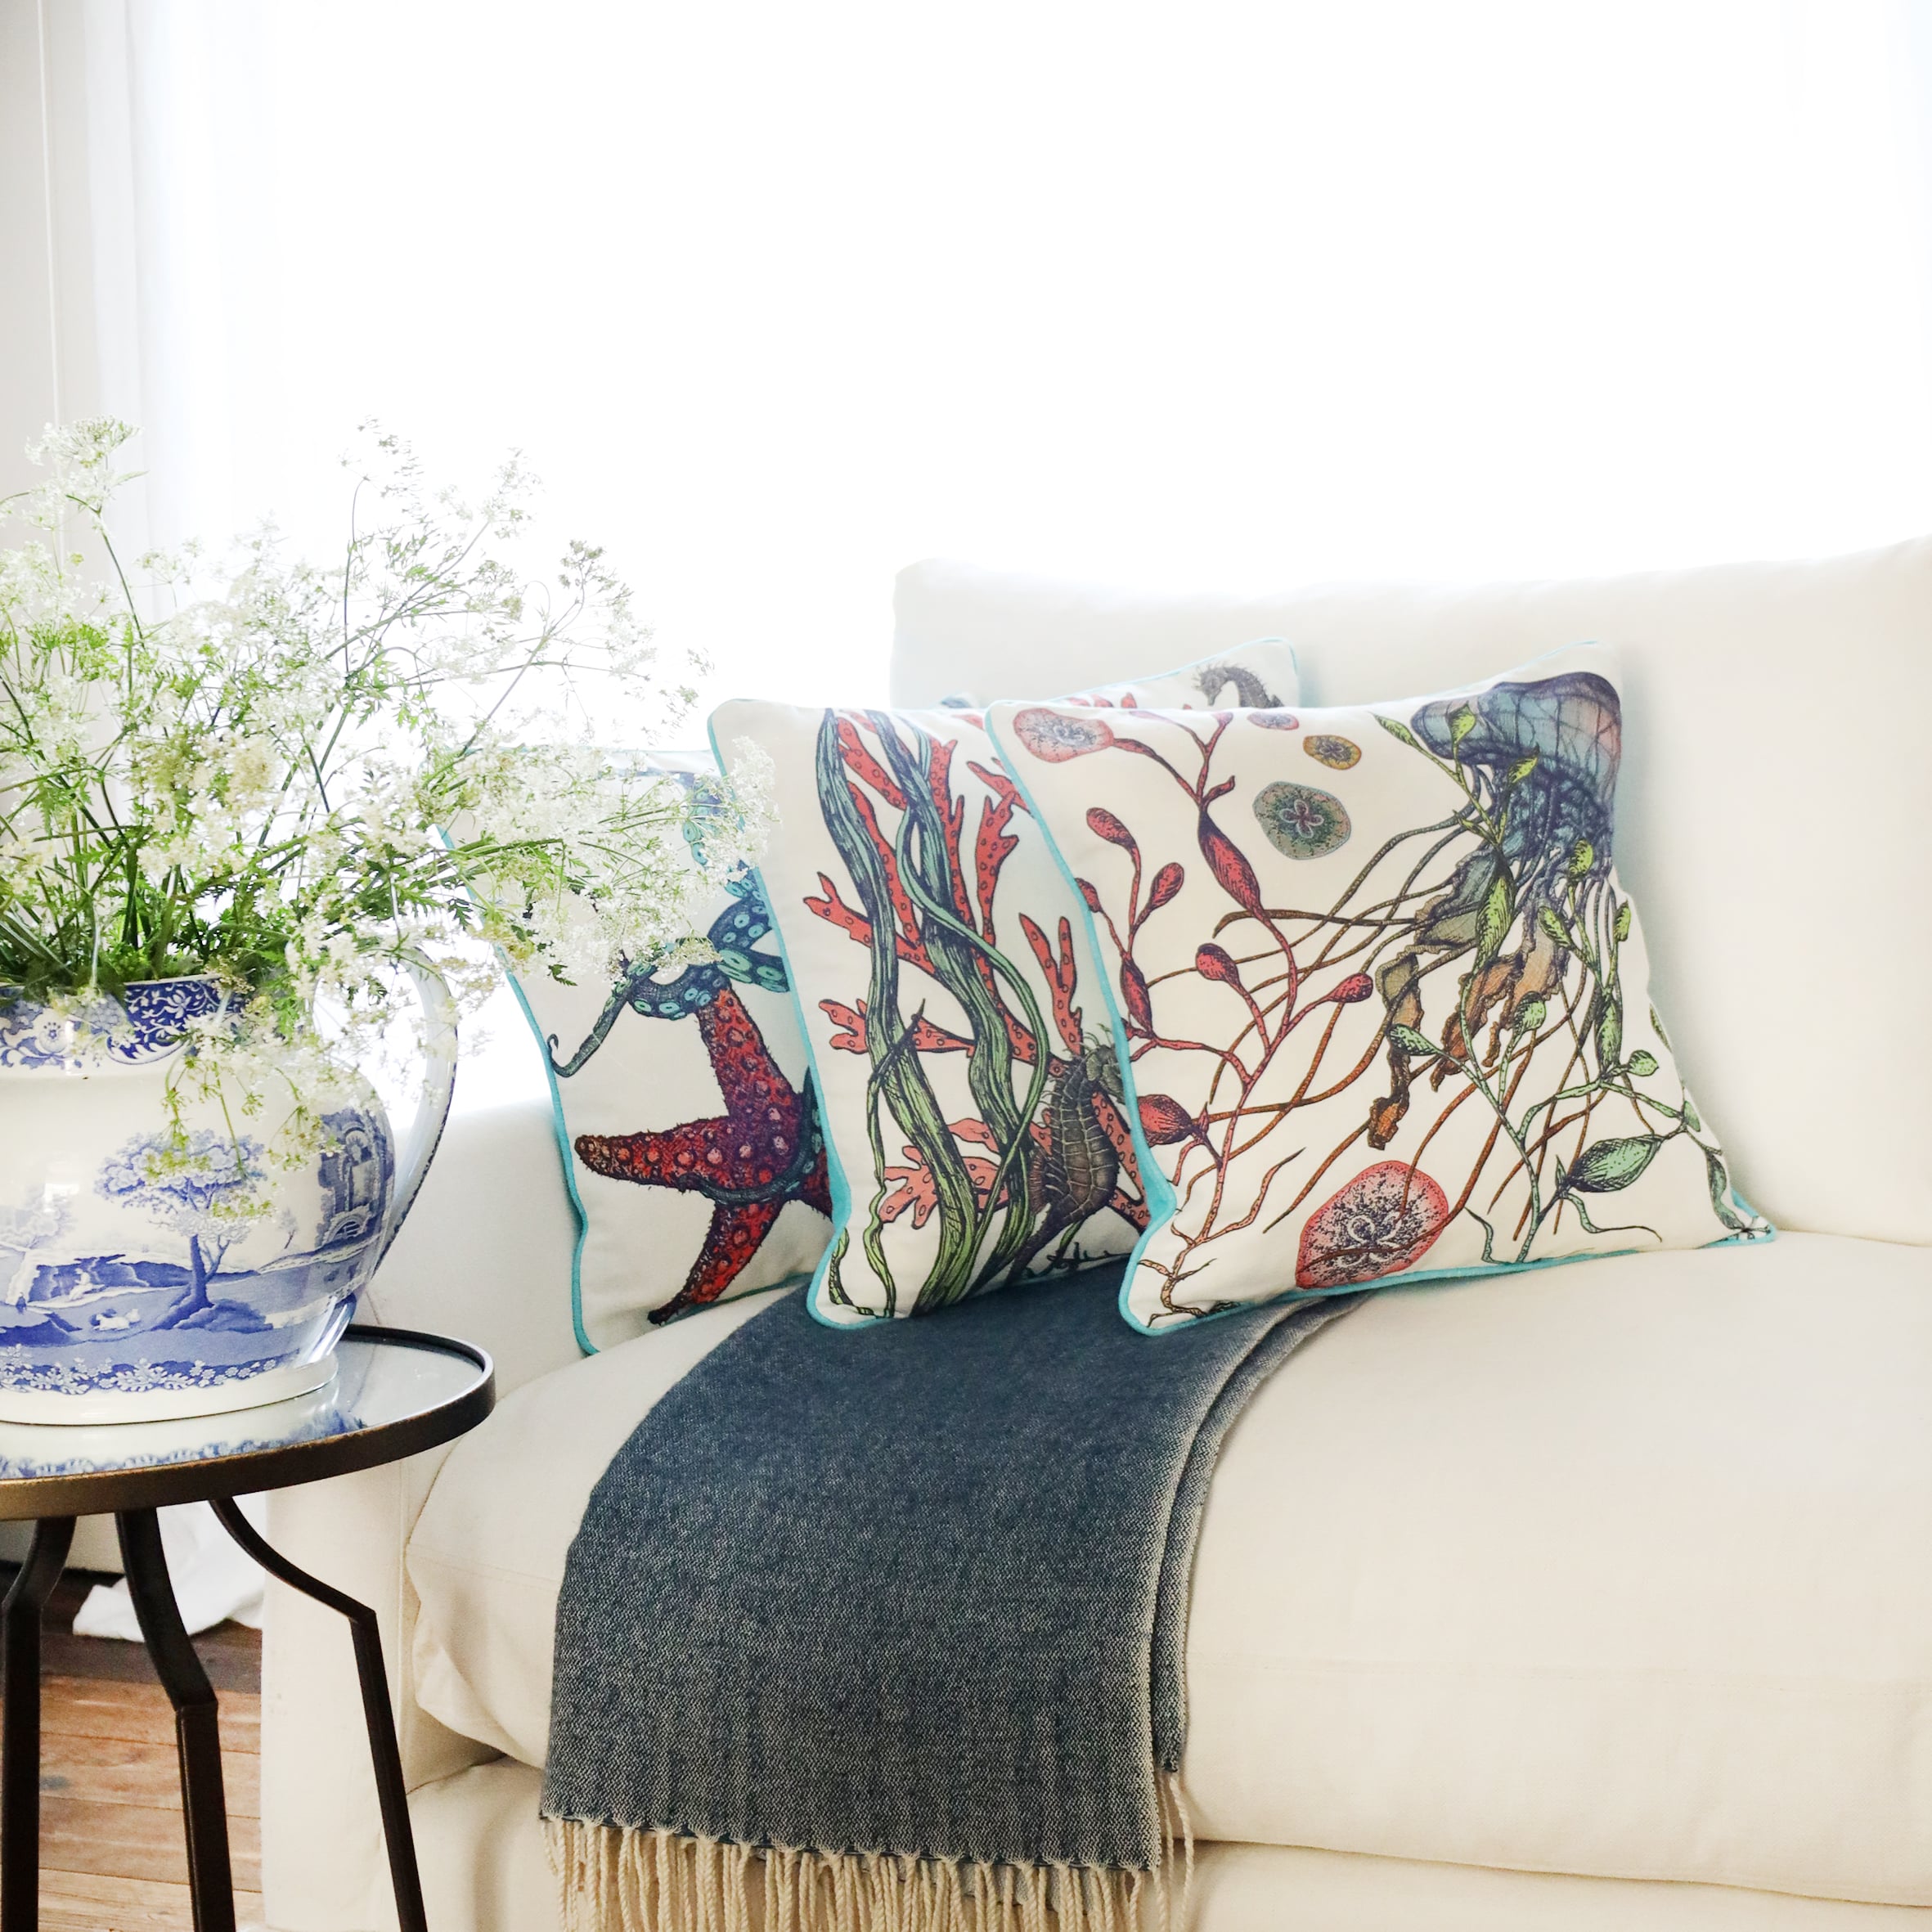 3 cushions an a white sofa with brightly coloured sea creatures illustrated  on with the sun streaming through the window at the back and a large willow pattern jug filled with cow parsley